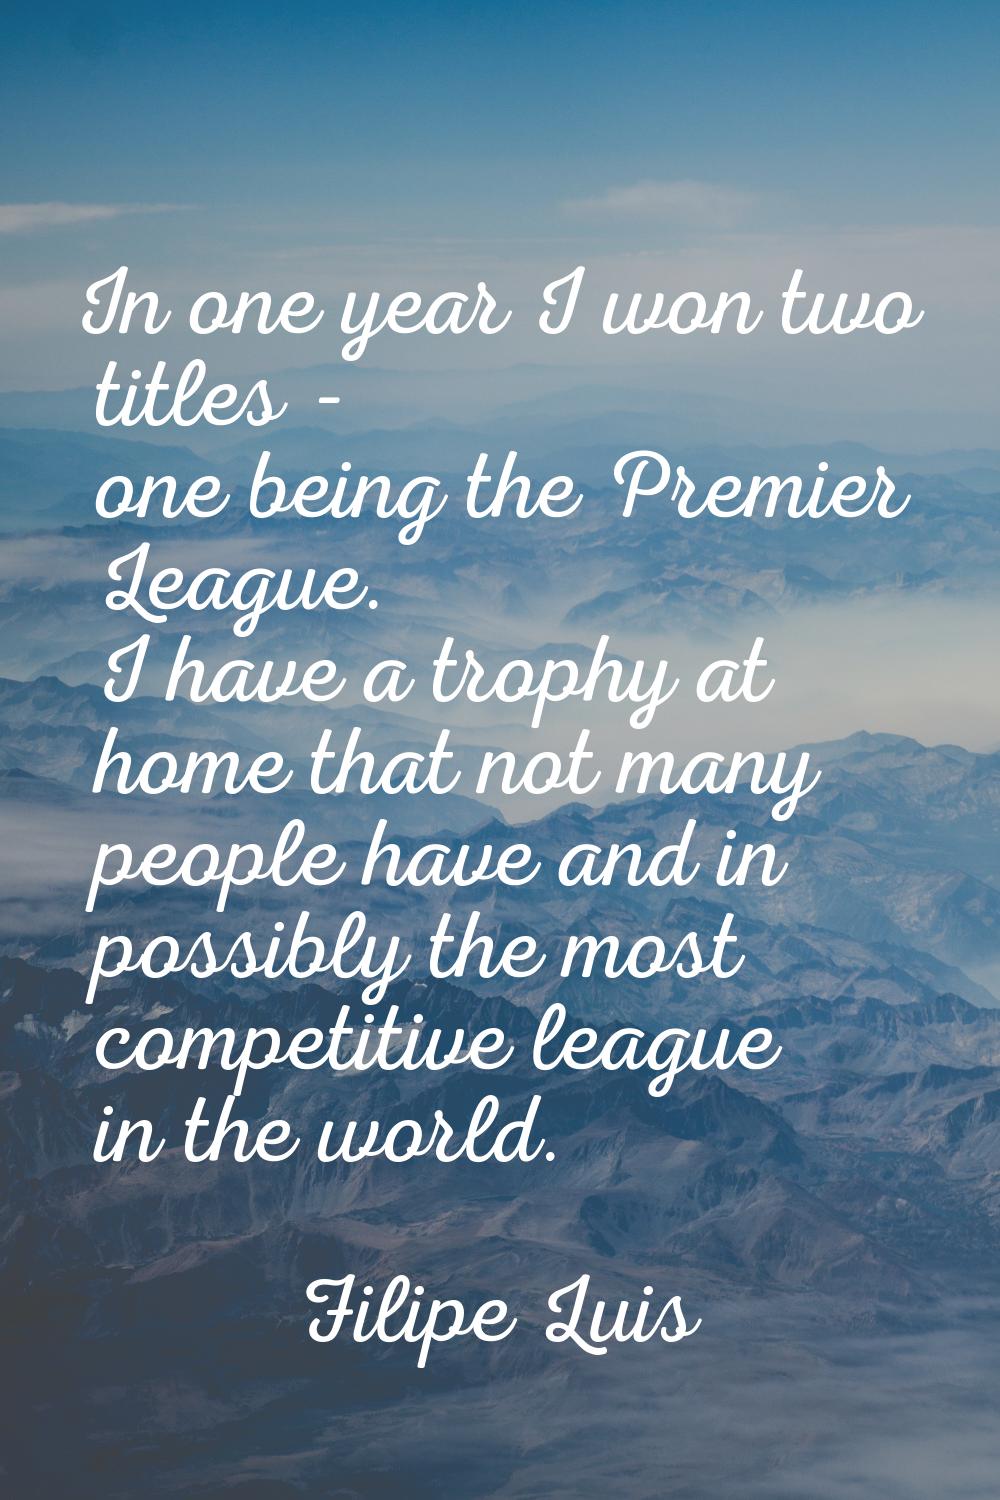 In one year I won two titles - one being the Premier League. I have a trophy at home that not many 